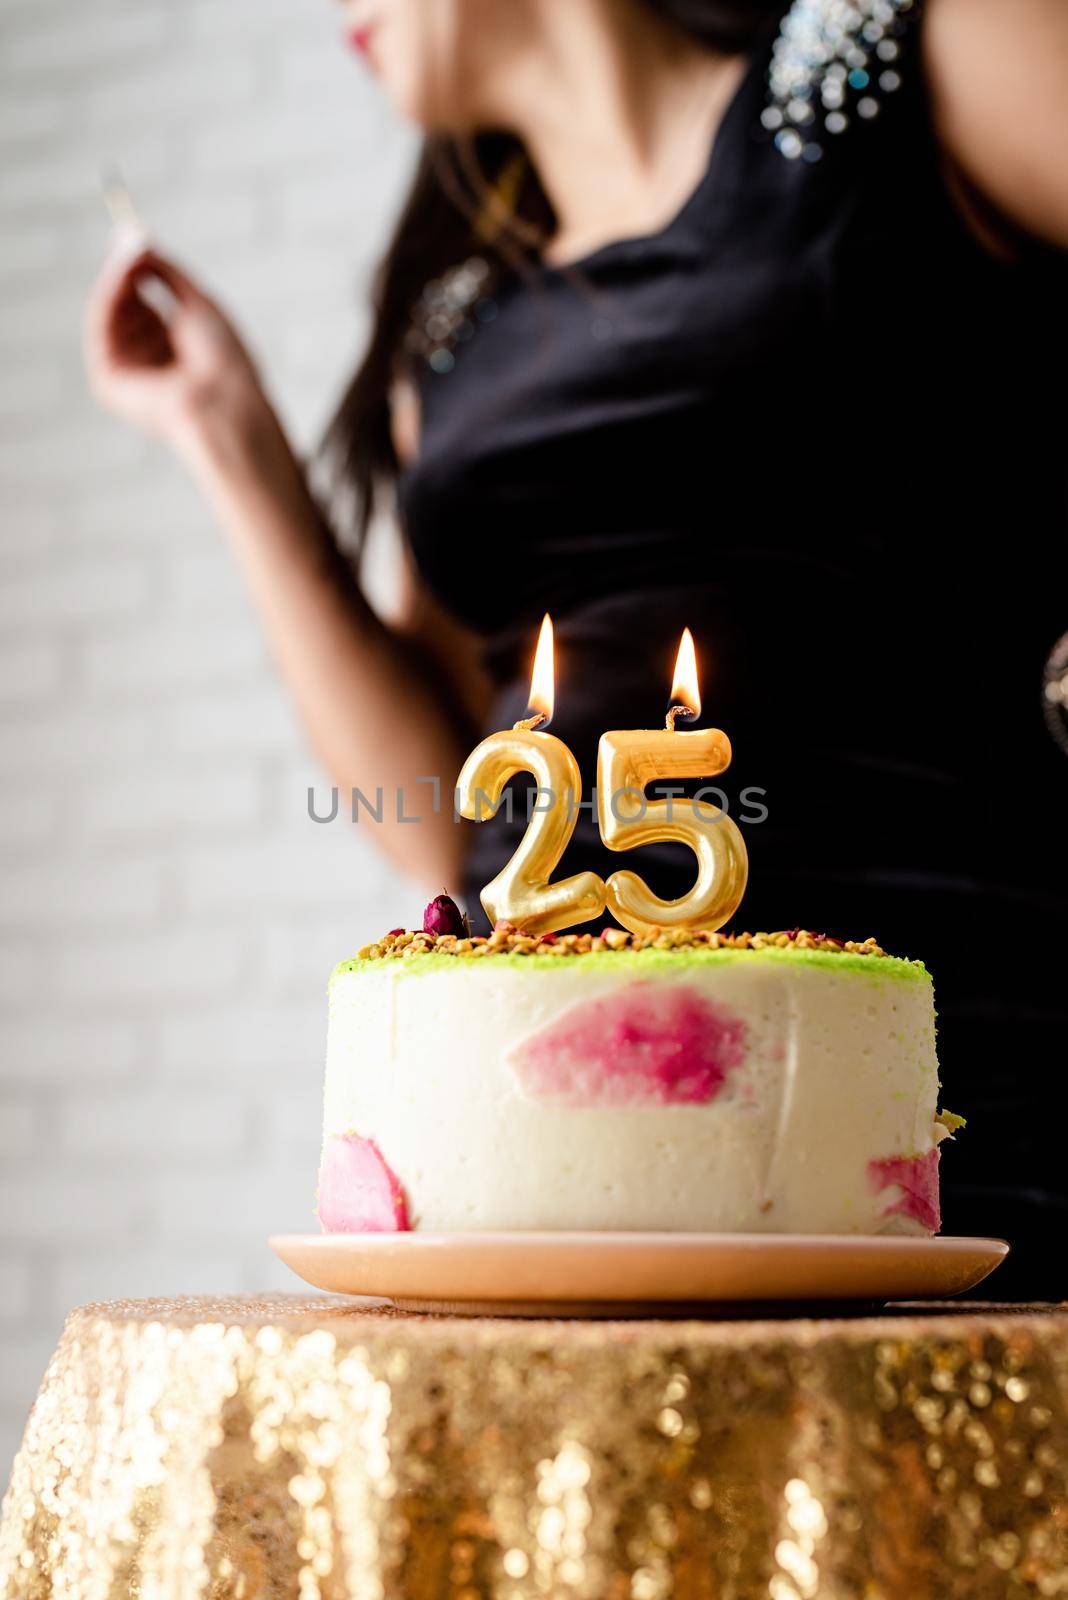 Birthday party. Caucasian woman in black party dress lighting candles on birthday cake